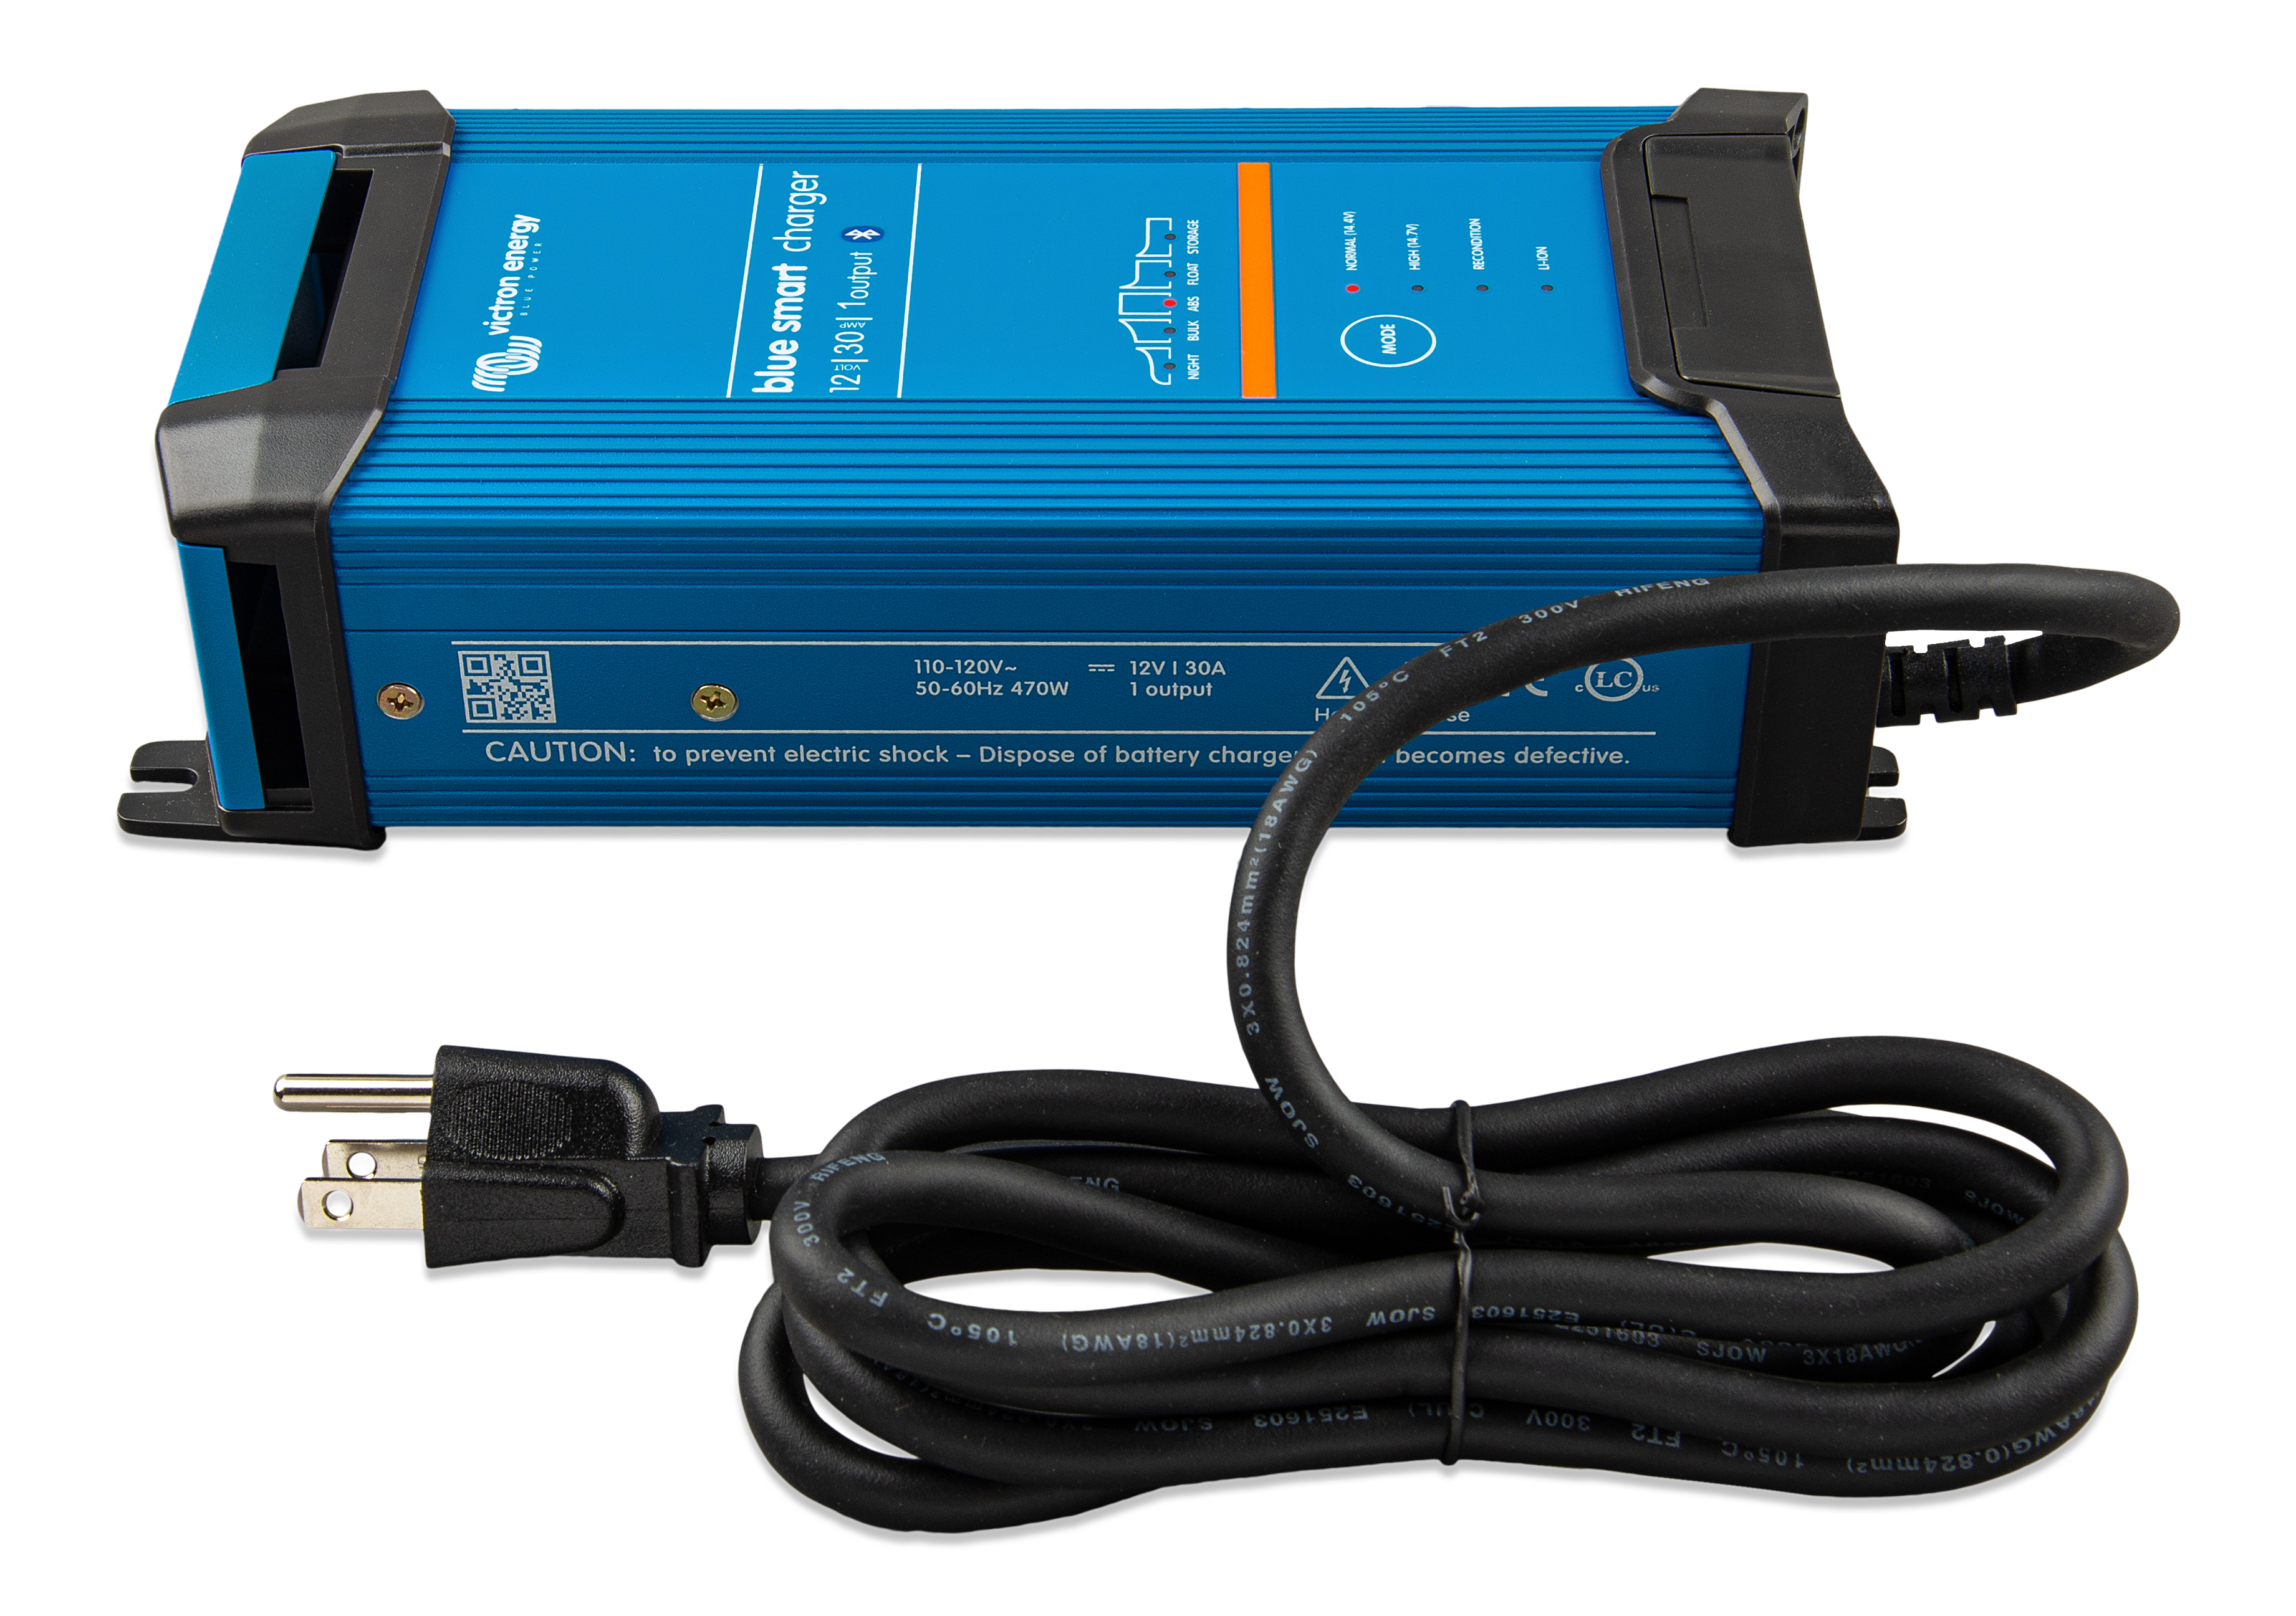 Victron Energy Blue Smart IP65 12-Volt 15 amp Battery Charger With Blu –  PowerTex Batteries